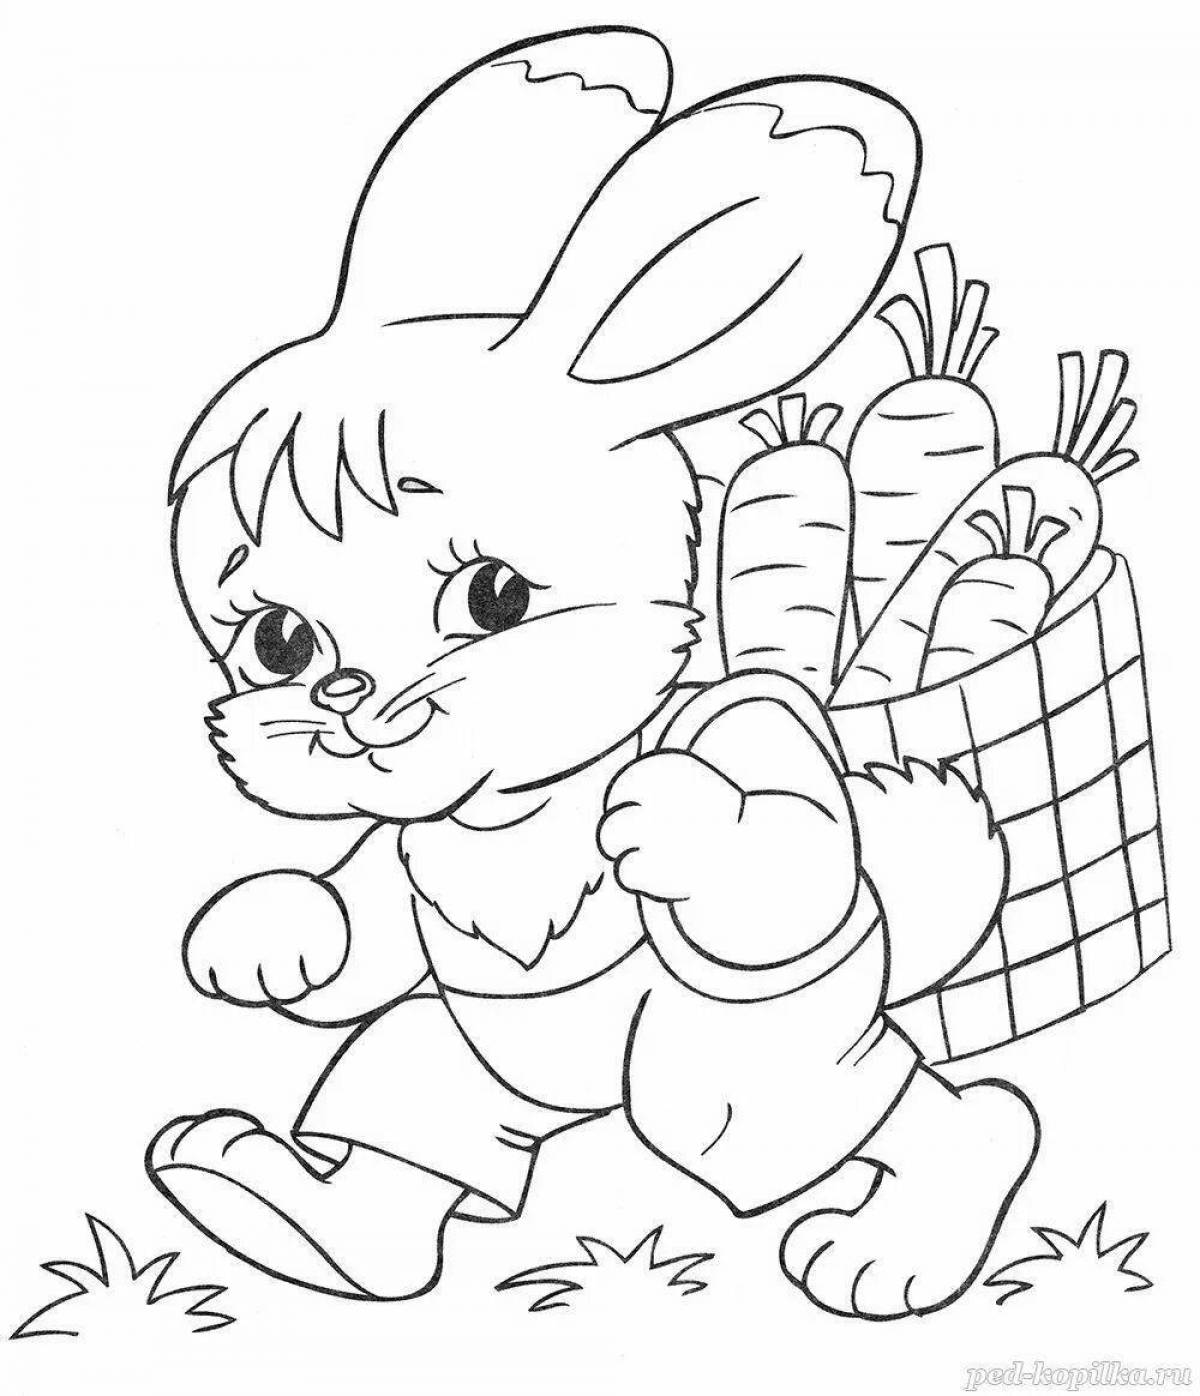 Fancy rabbit coloring book for 2 year olds